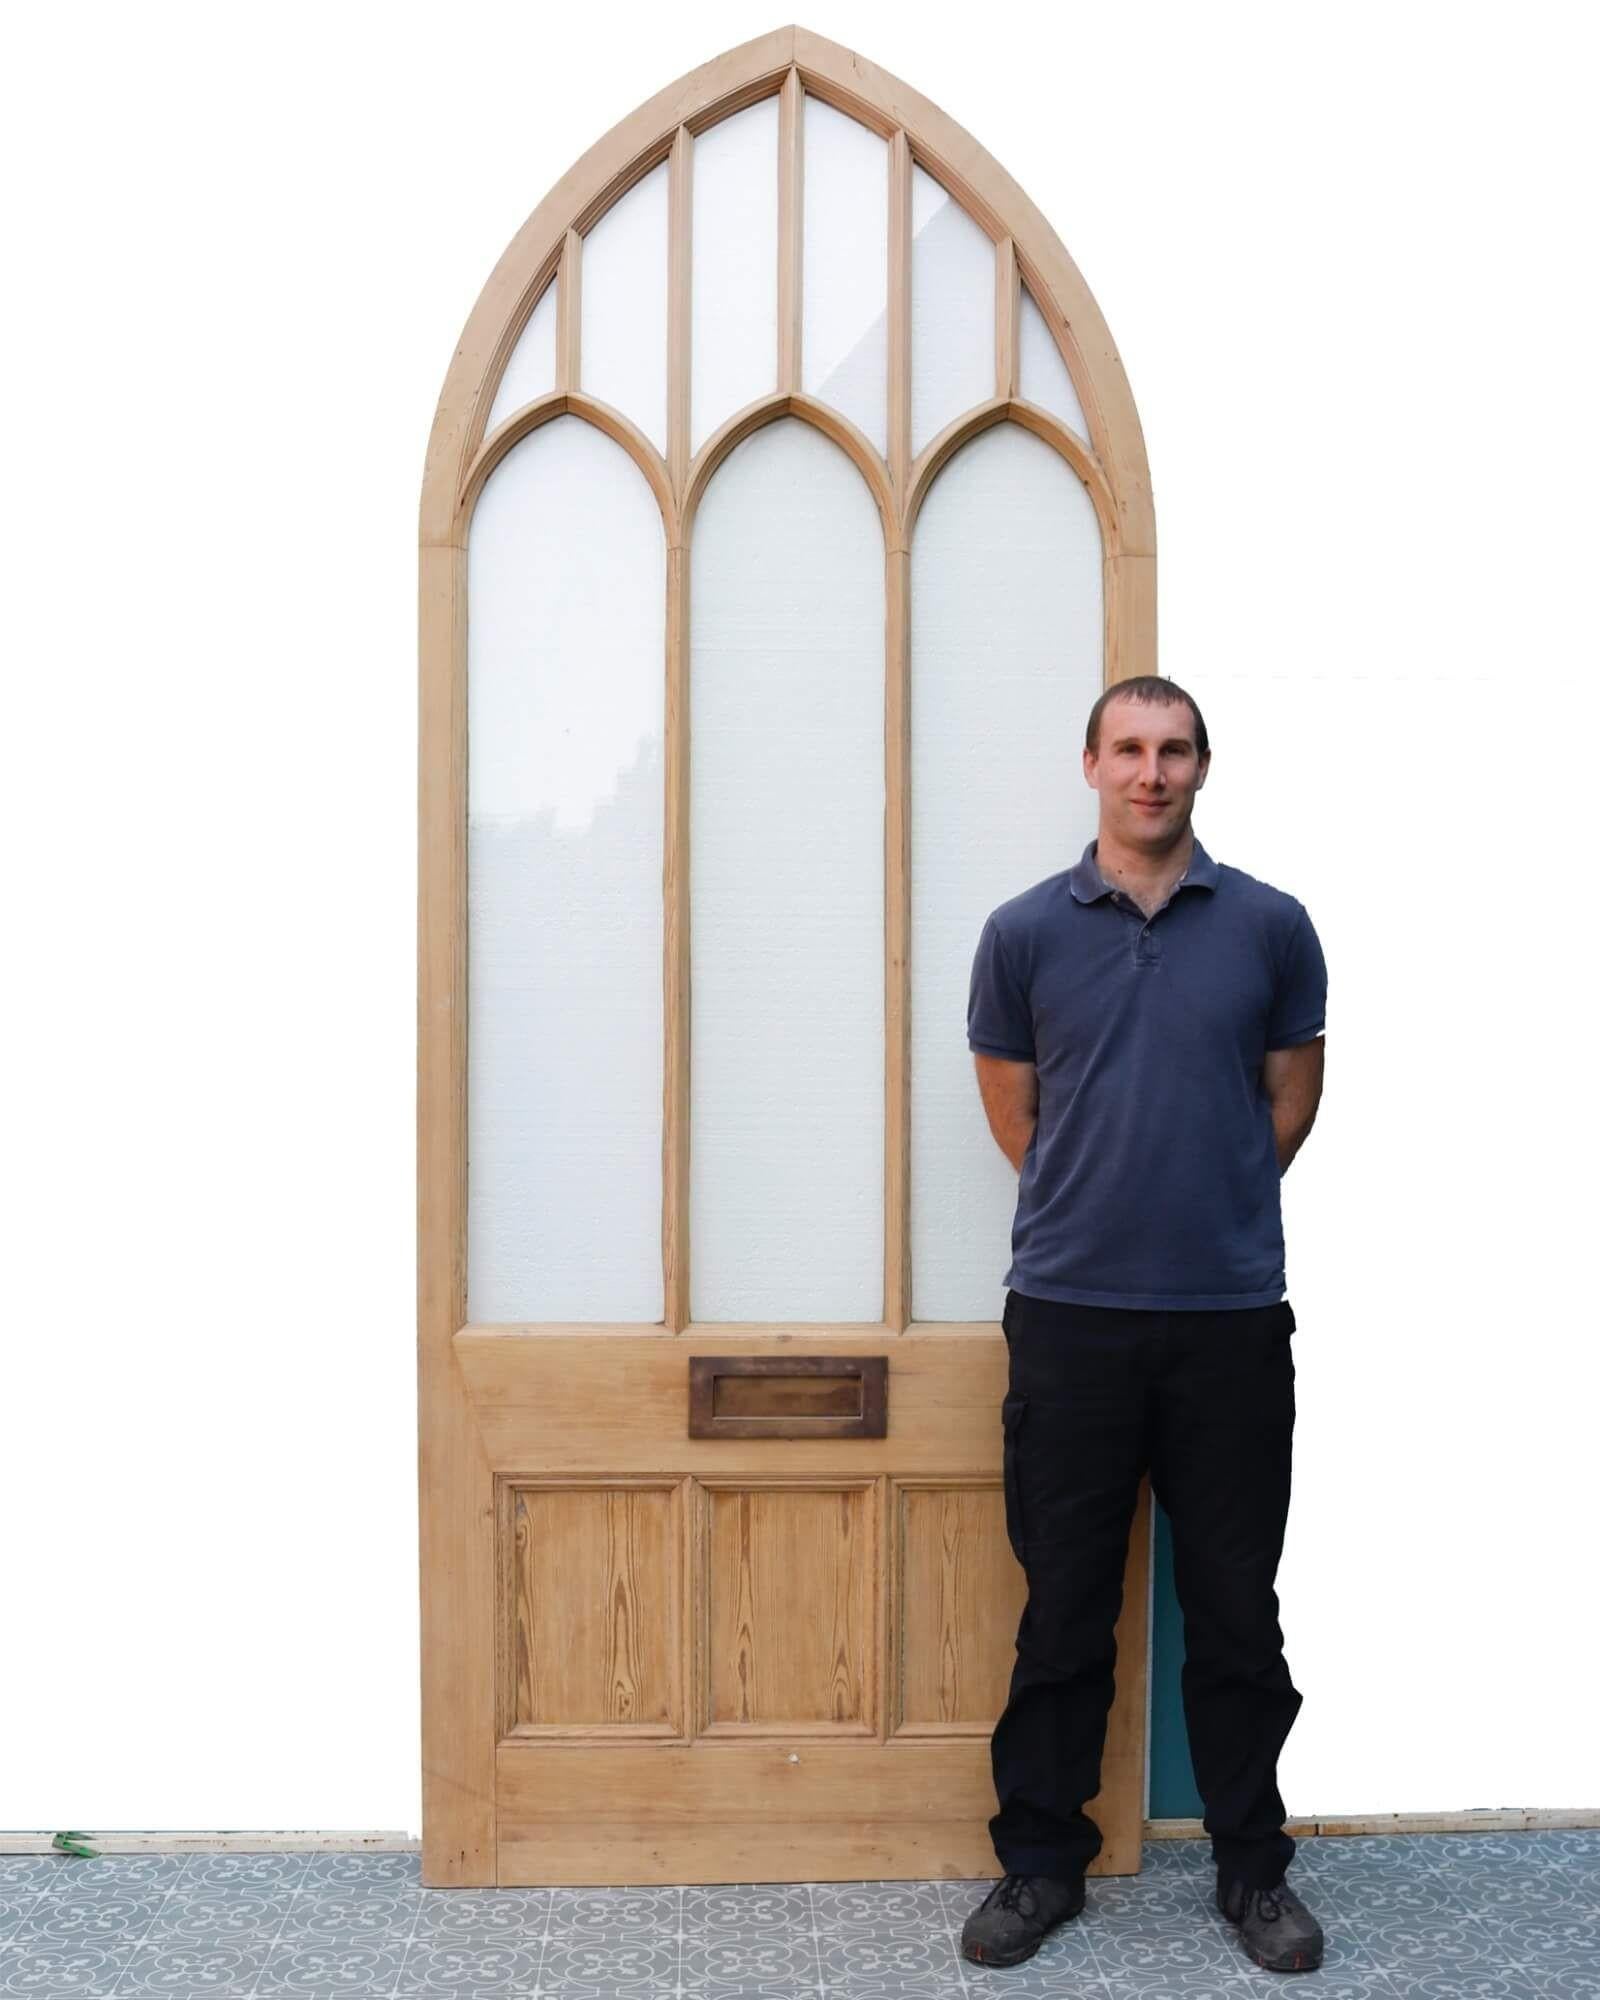 Dating from 19th century England, this large glazed Victorian arched door is a stunning feature for properties period and modern. It was reclaimed from a Victorian orangery and as such features large, elongated single glazed, clear glass windows and